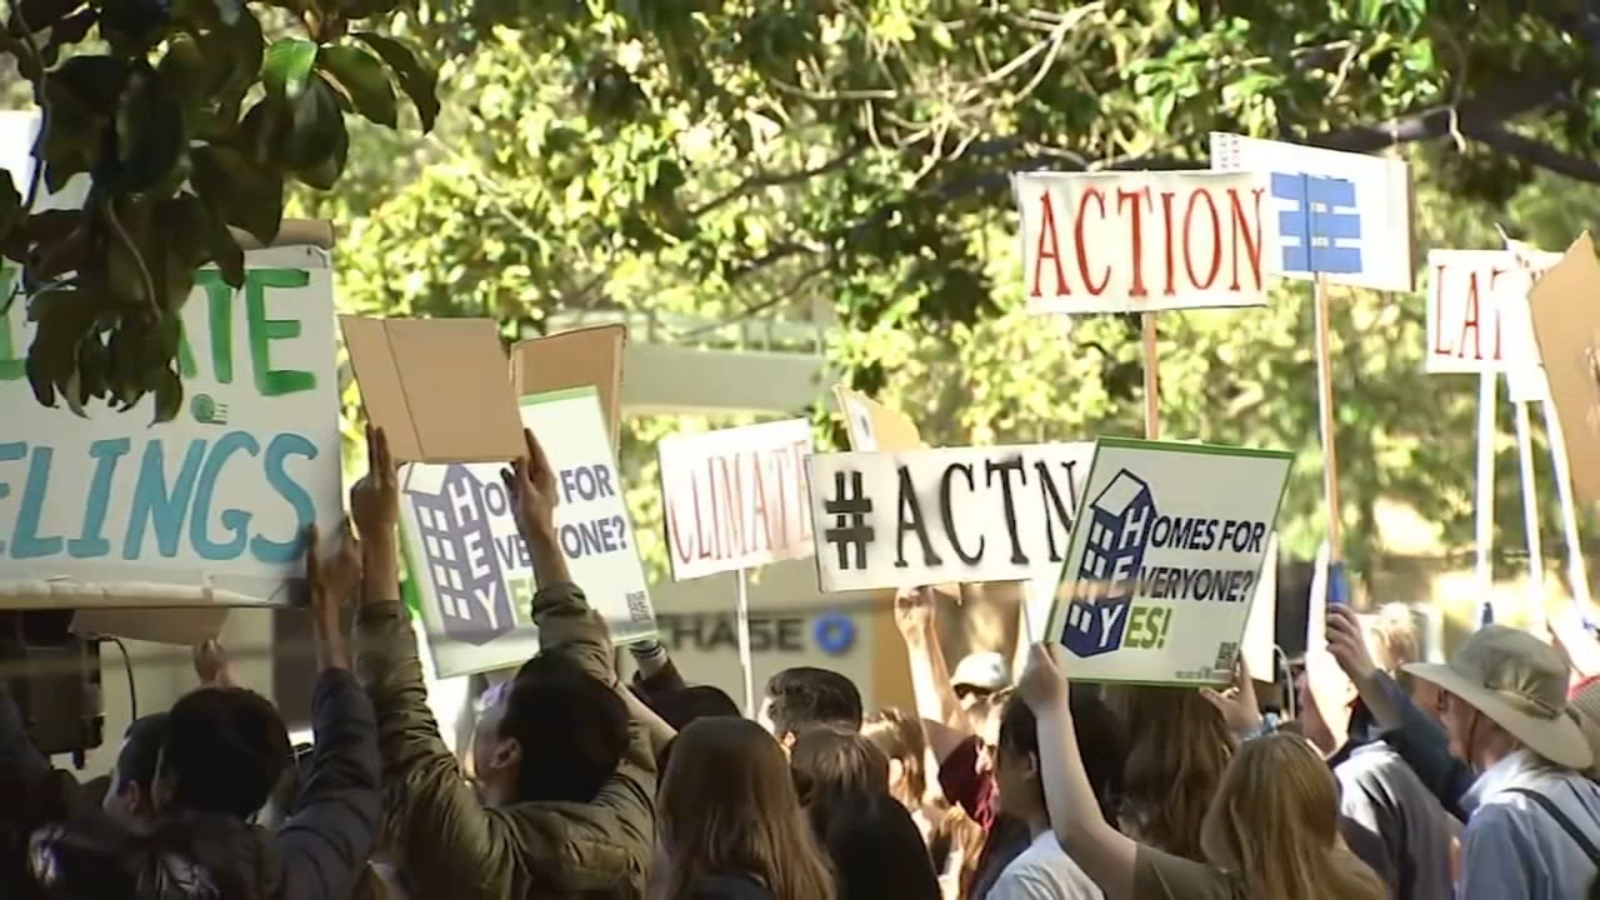 Earth Day events: Bay Area youth activists, Palo Alto Student Climate Coalition hold rally to end fossil fuels [Video]